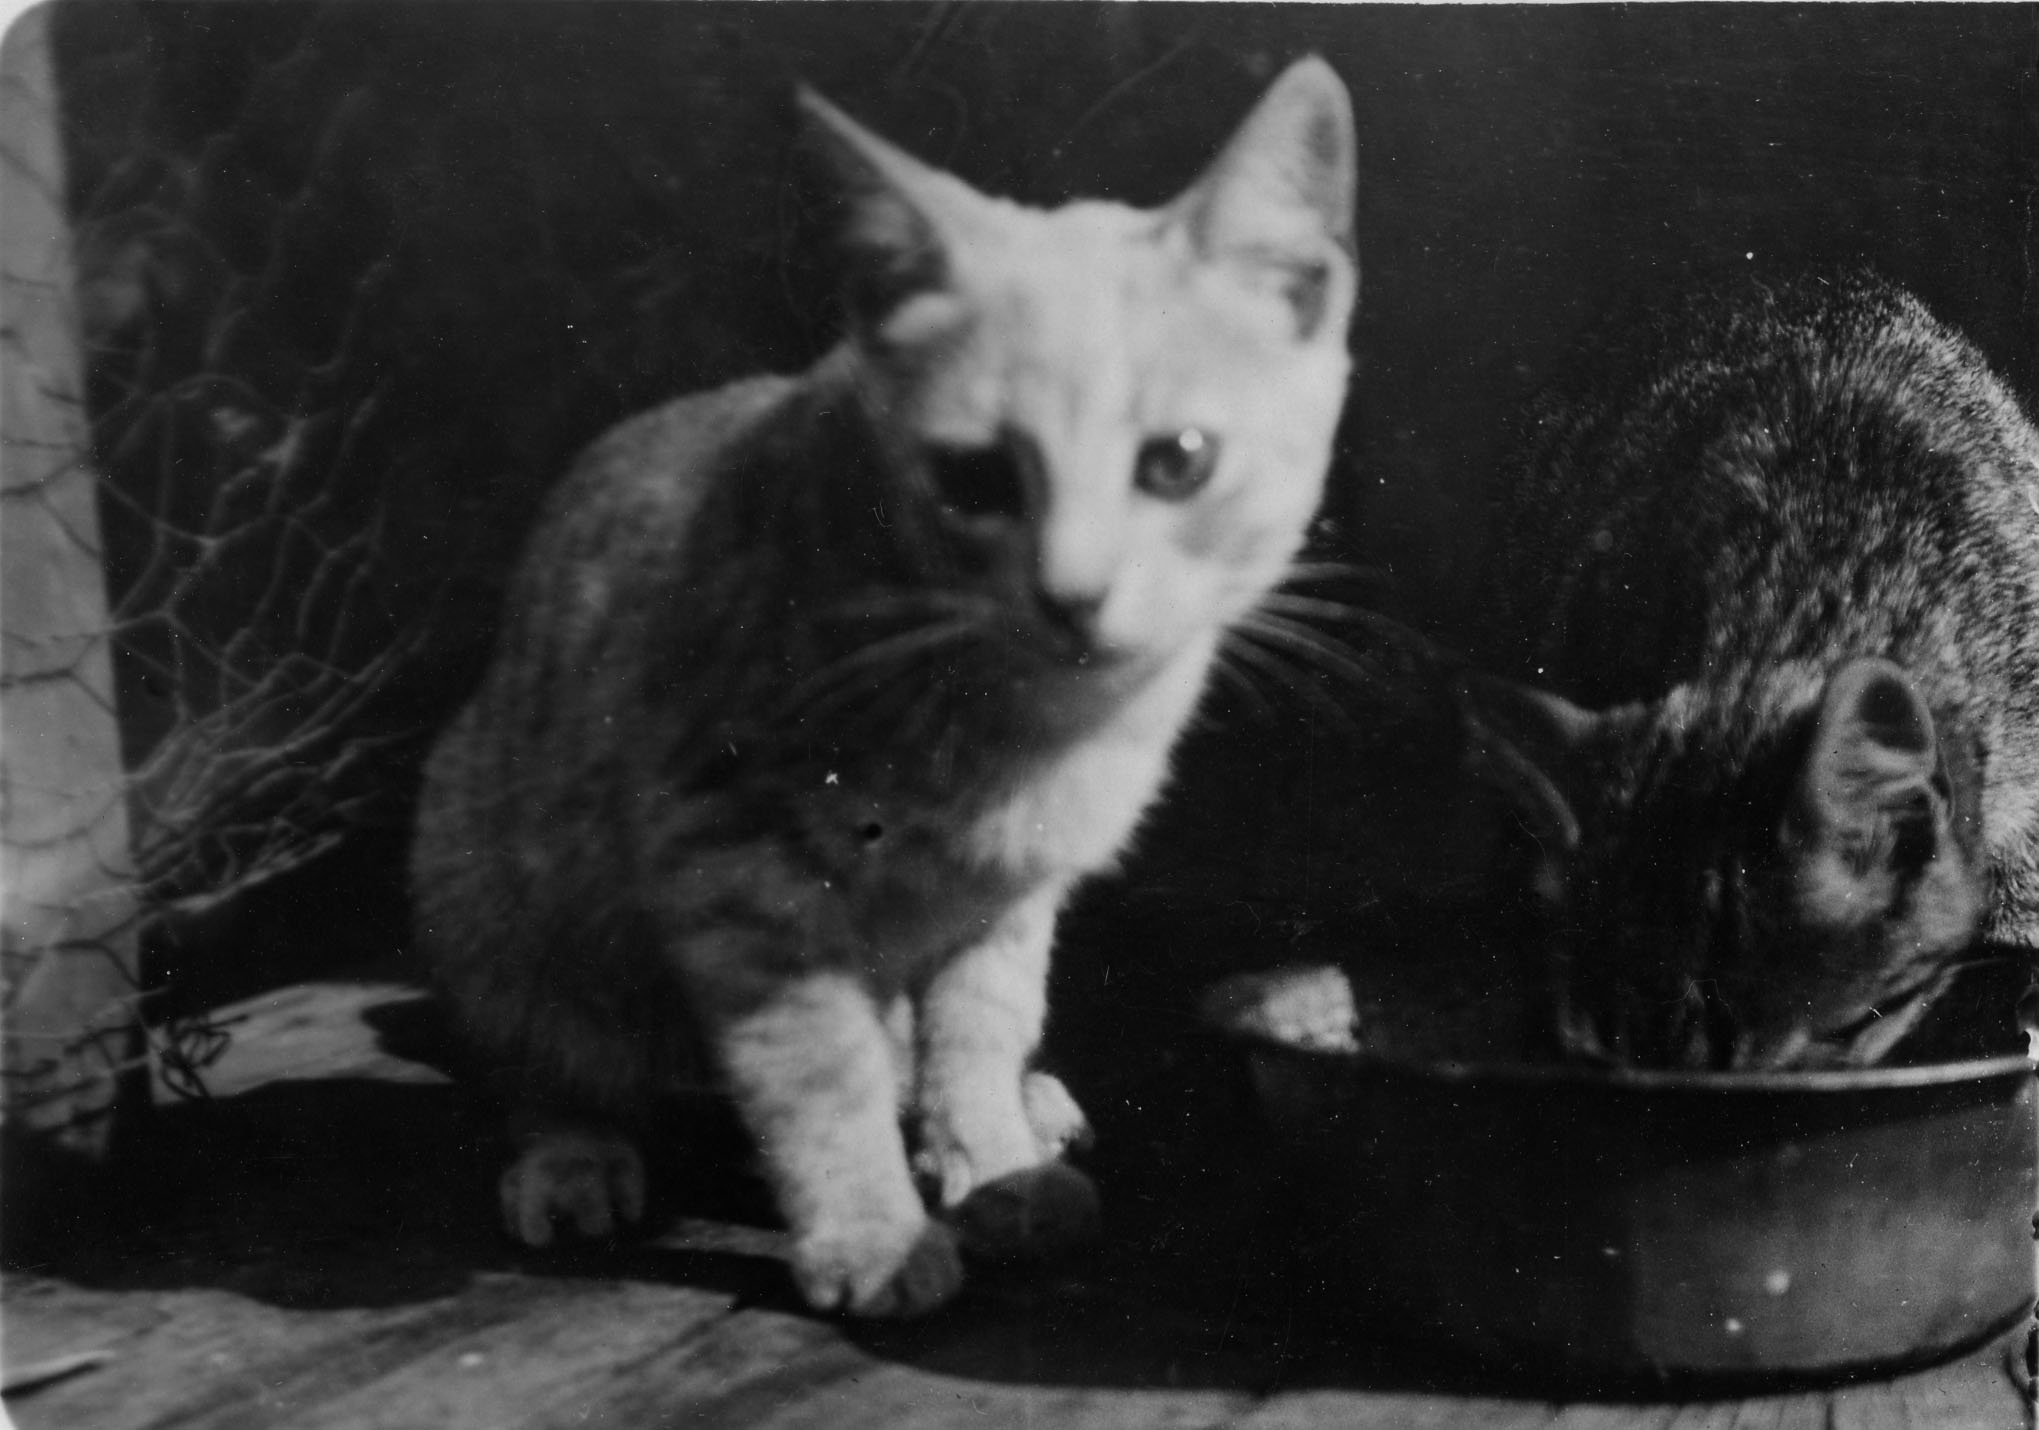 Two cats drink from a saucer, undated